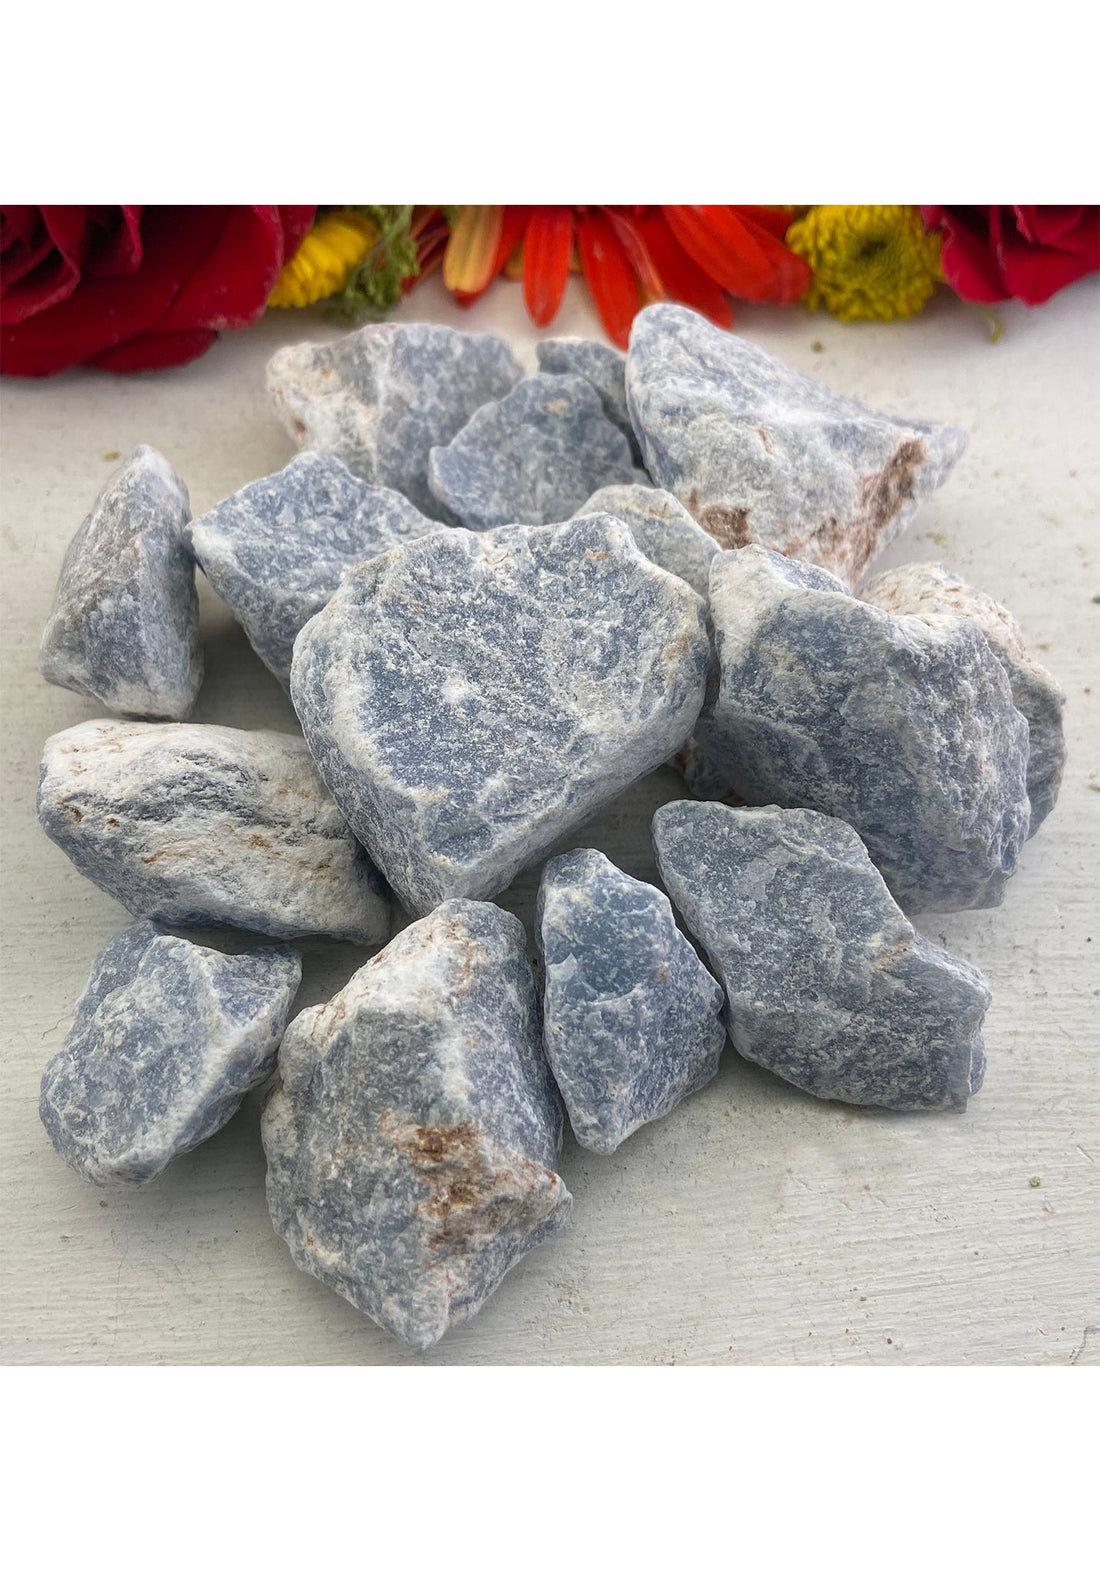 Angelite Natural Raw Rough Gemstone - Stone of Angelic Beings 2